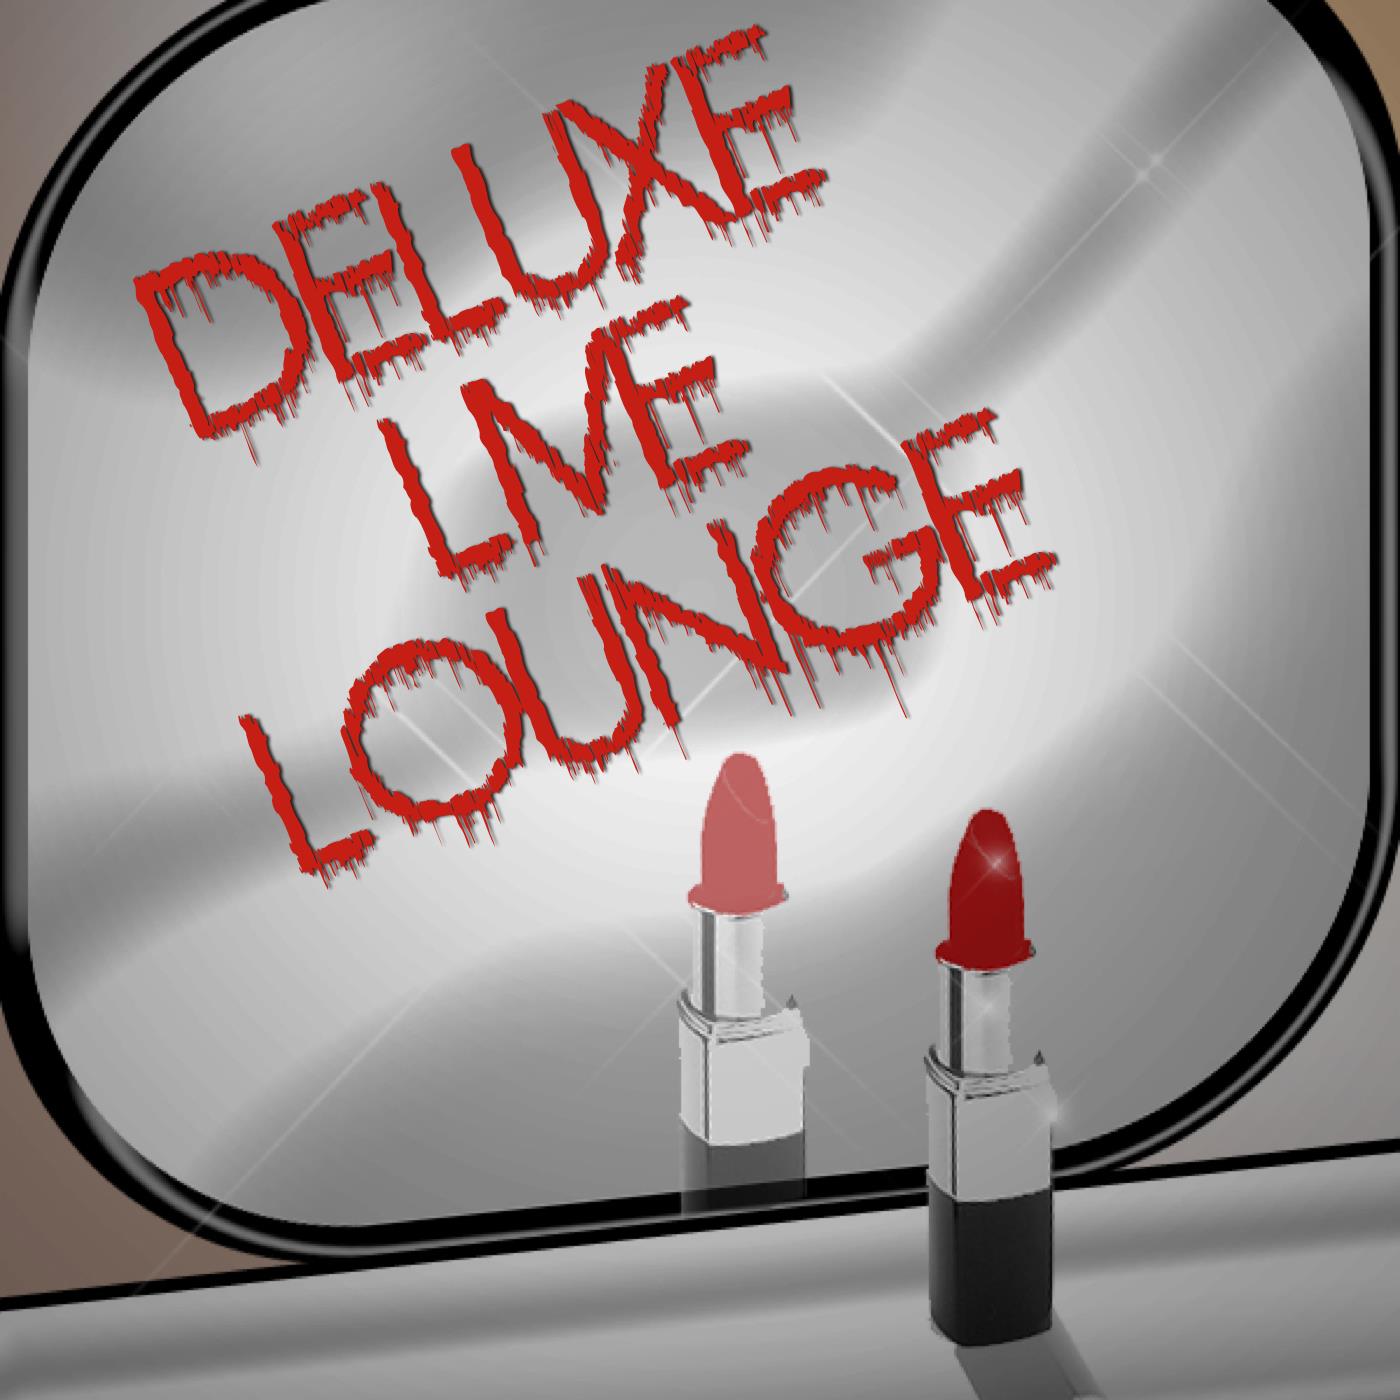 Deluxe Live Lounge